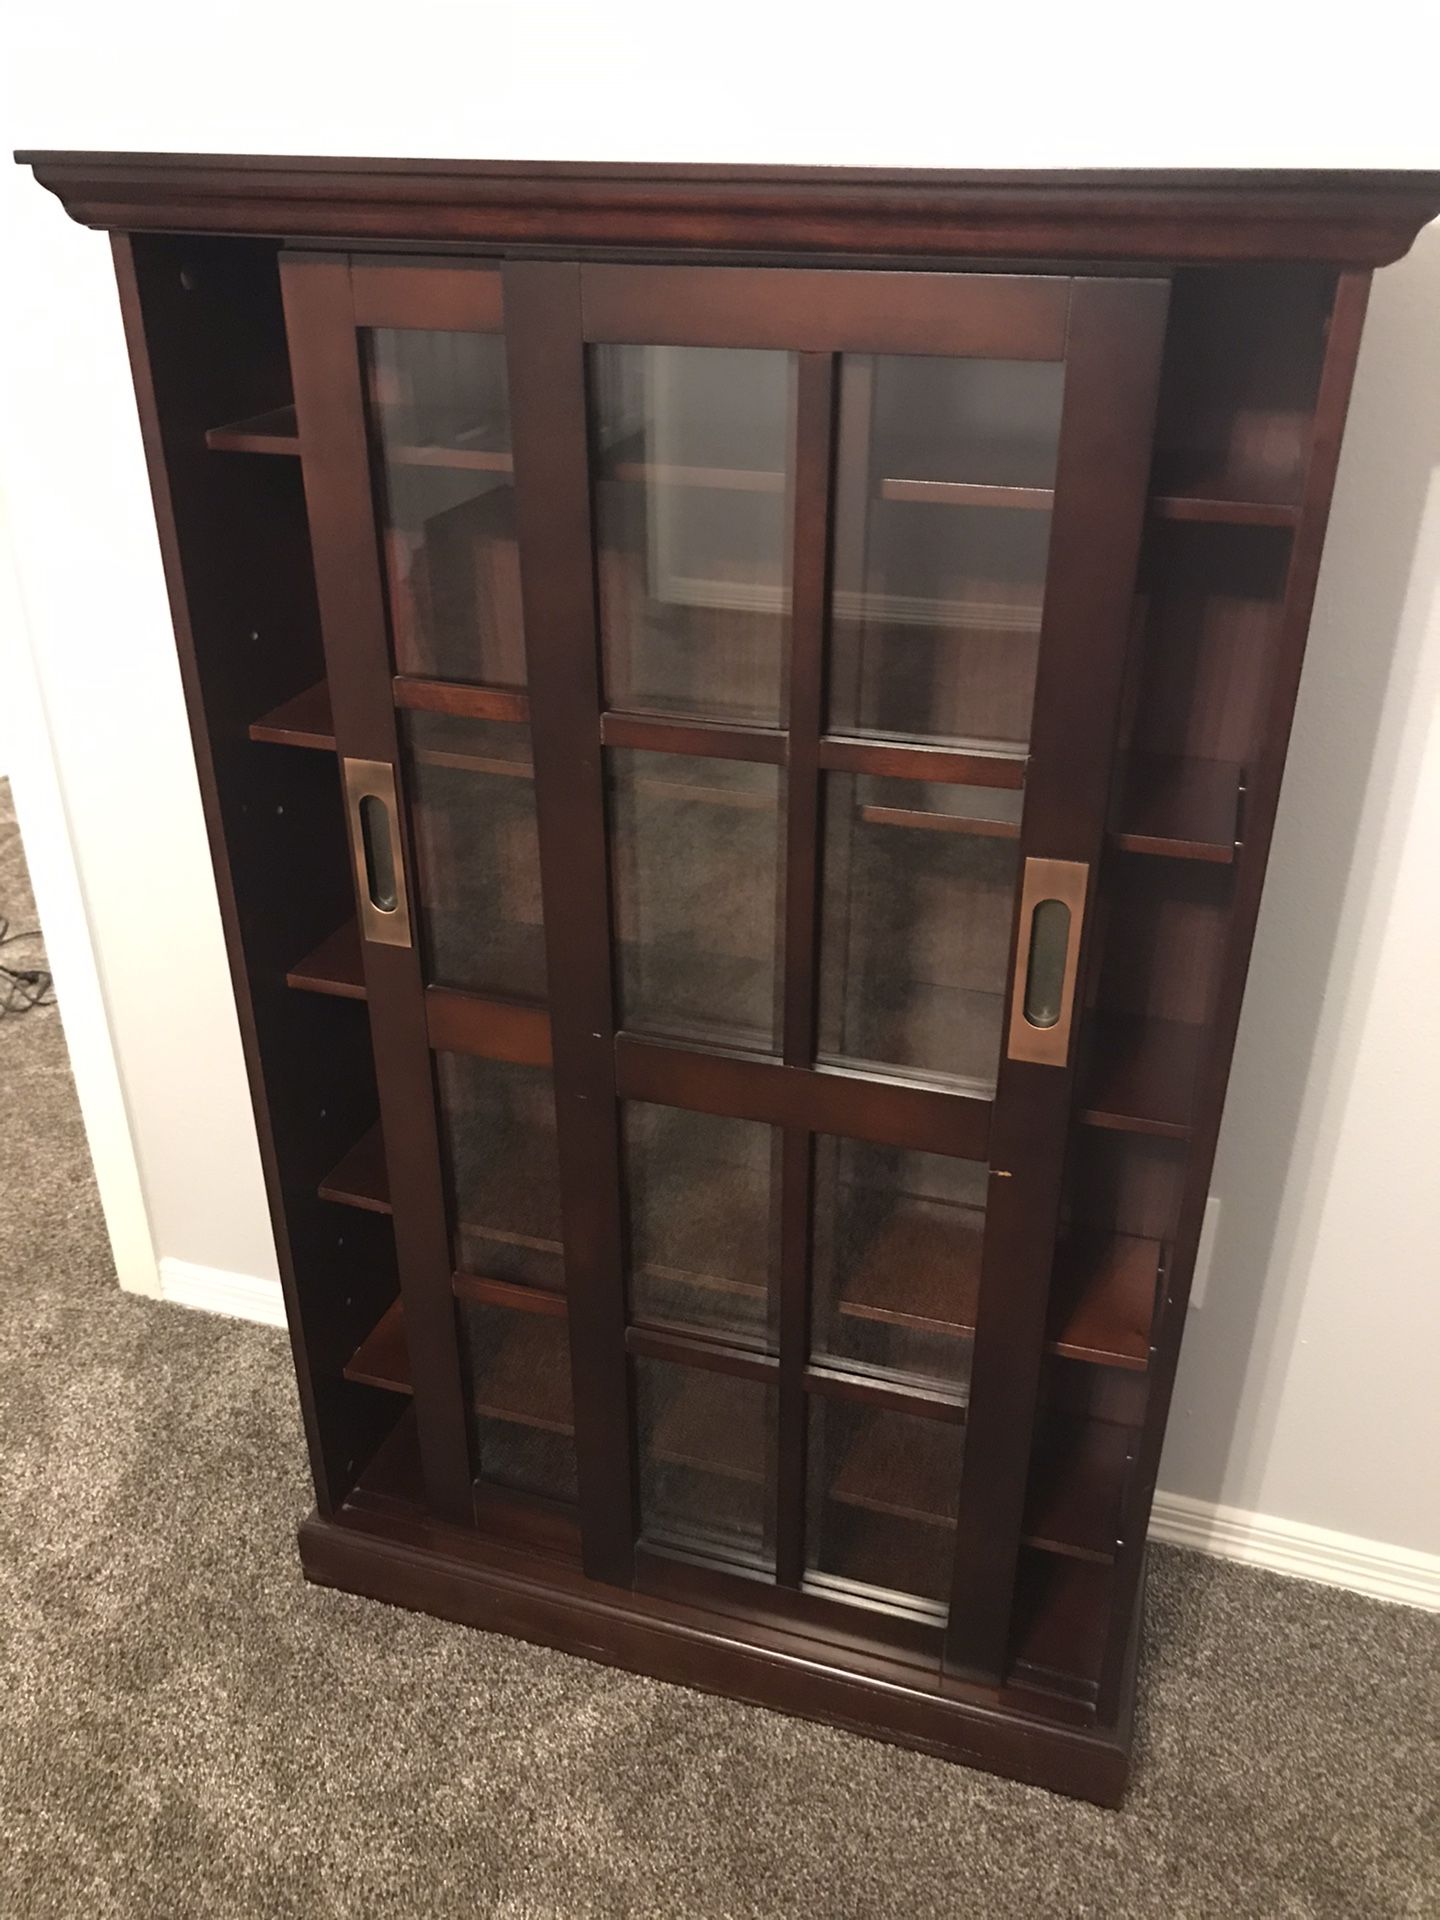 DVD Case and/or Bookshelf! Gently used with glass doors and adjustable/removable shelves